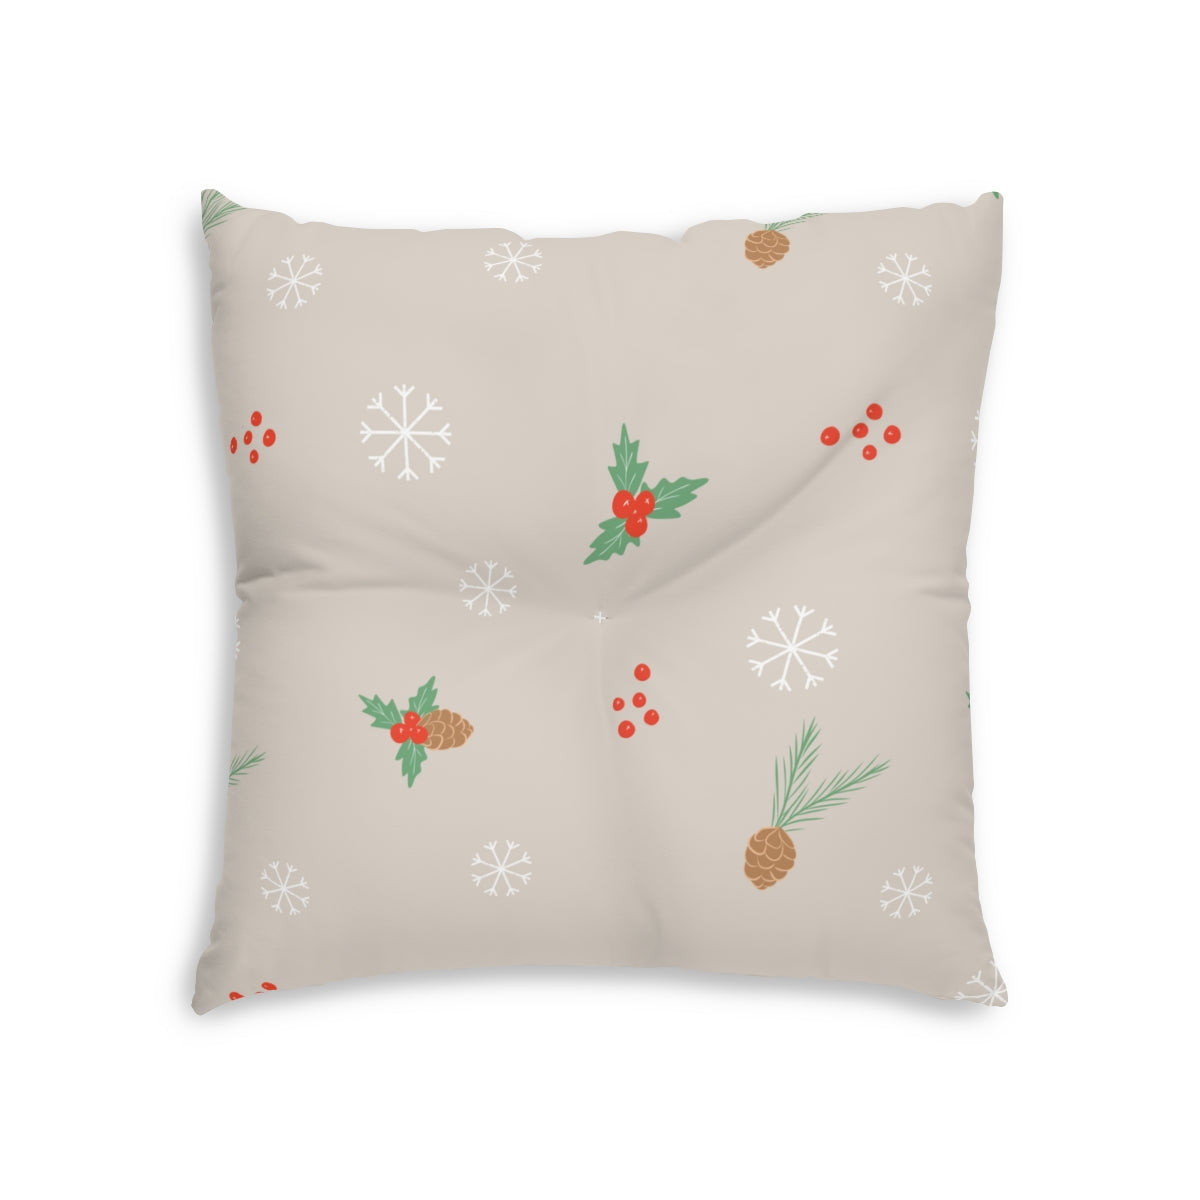 Lifestyle Details - Square Tufted Holiday Floor Pillow - Pinecones & Snowflakes - 26x26 - Front View